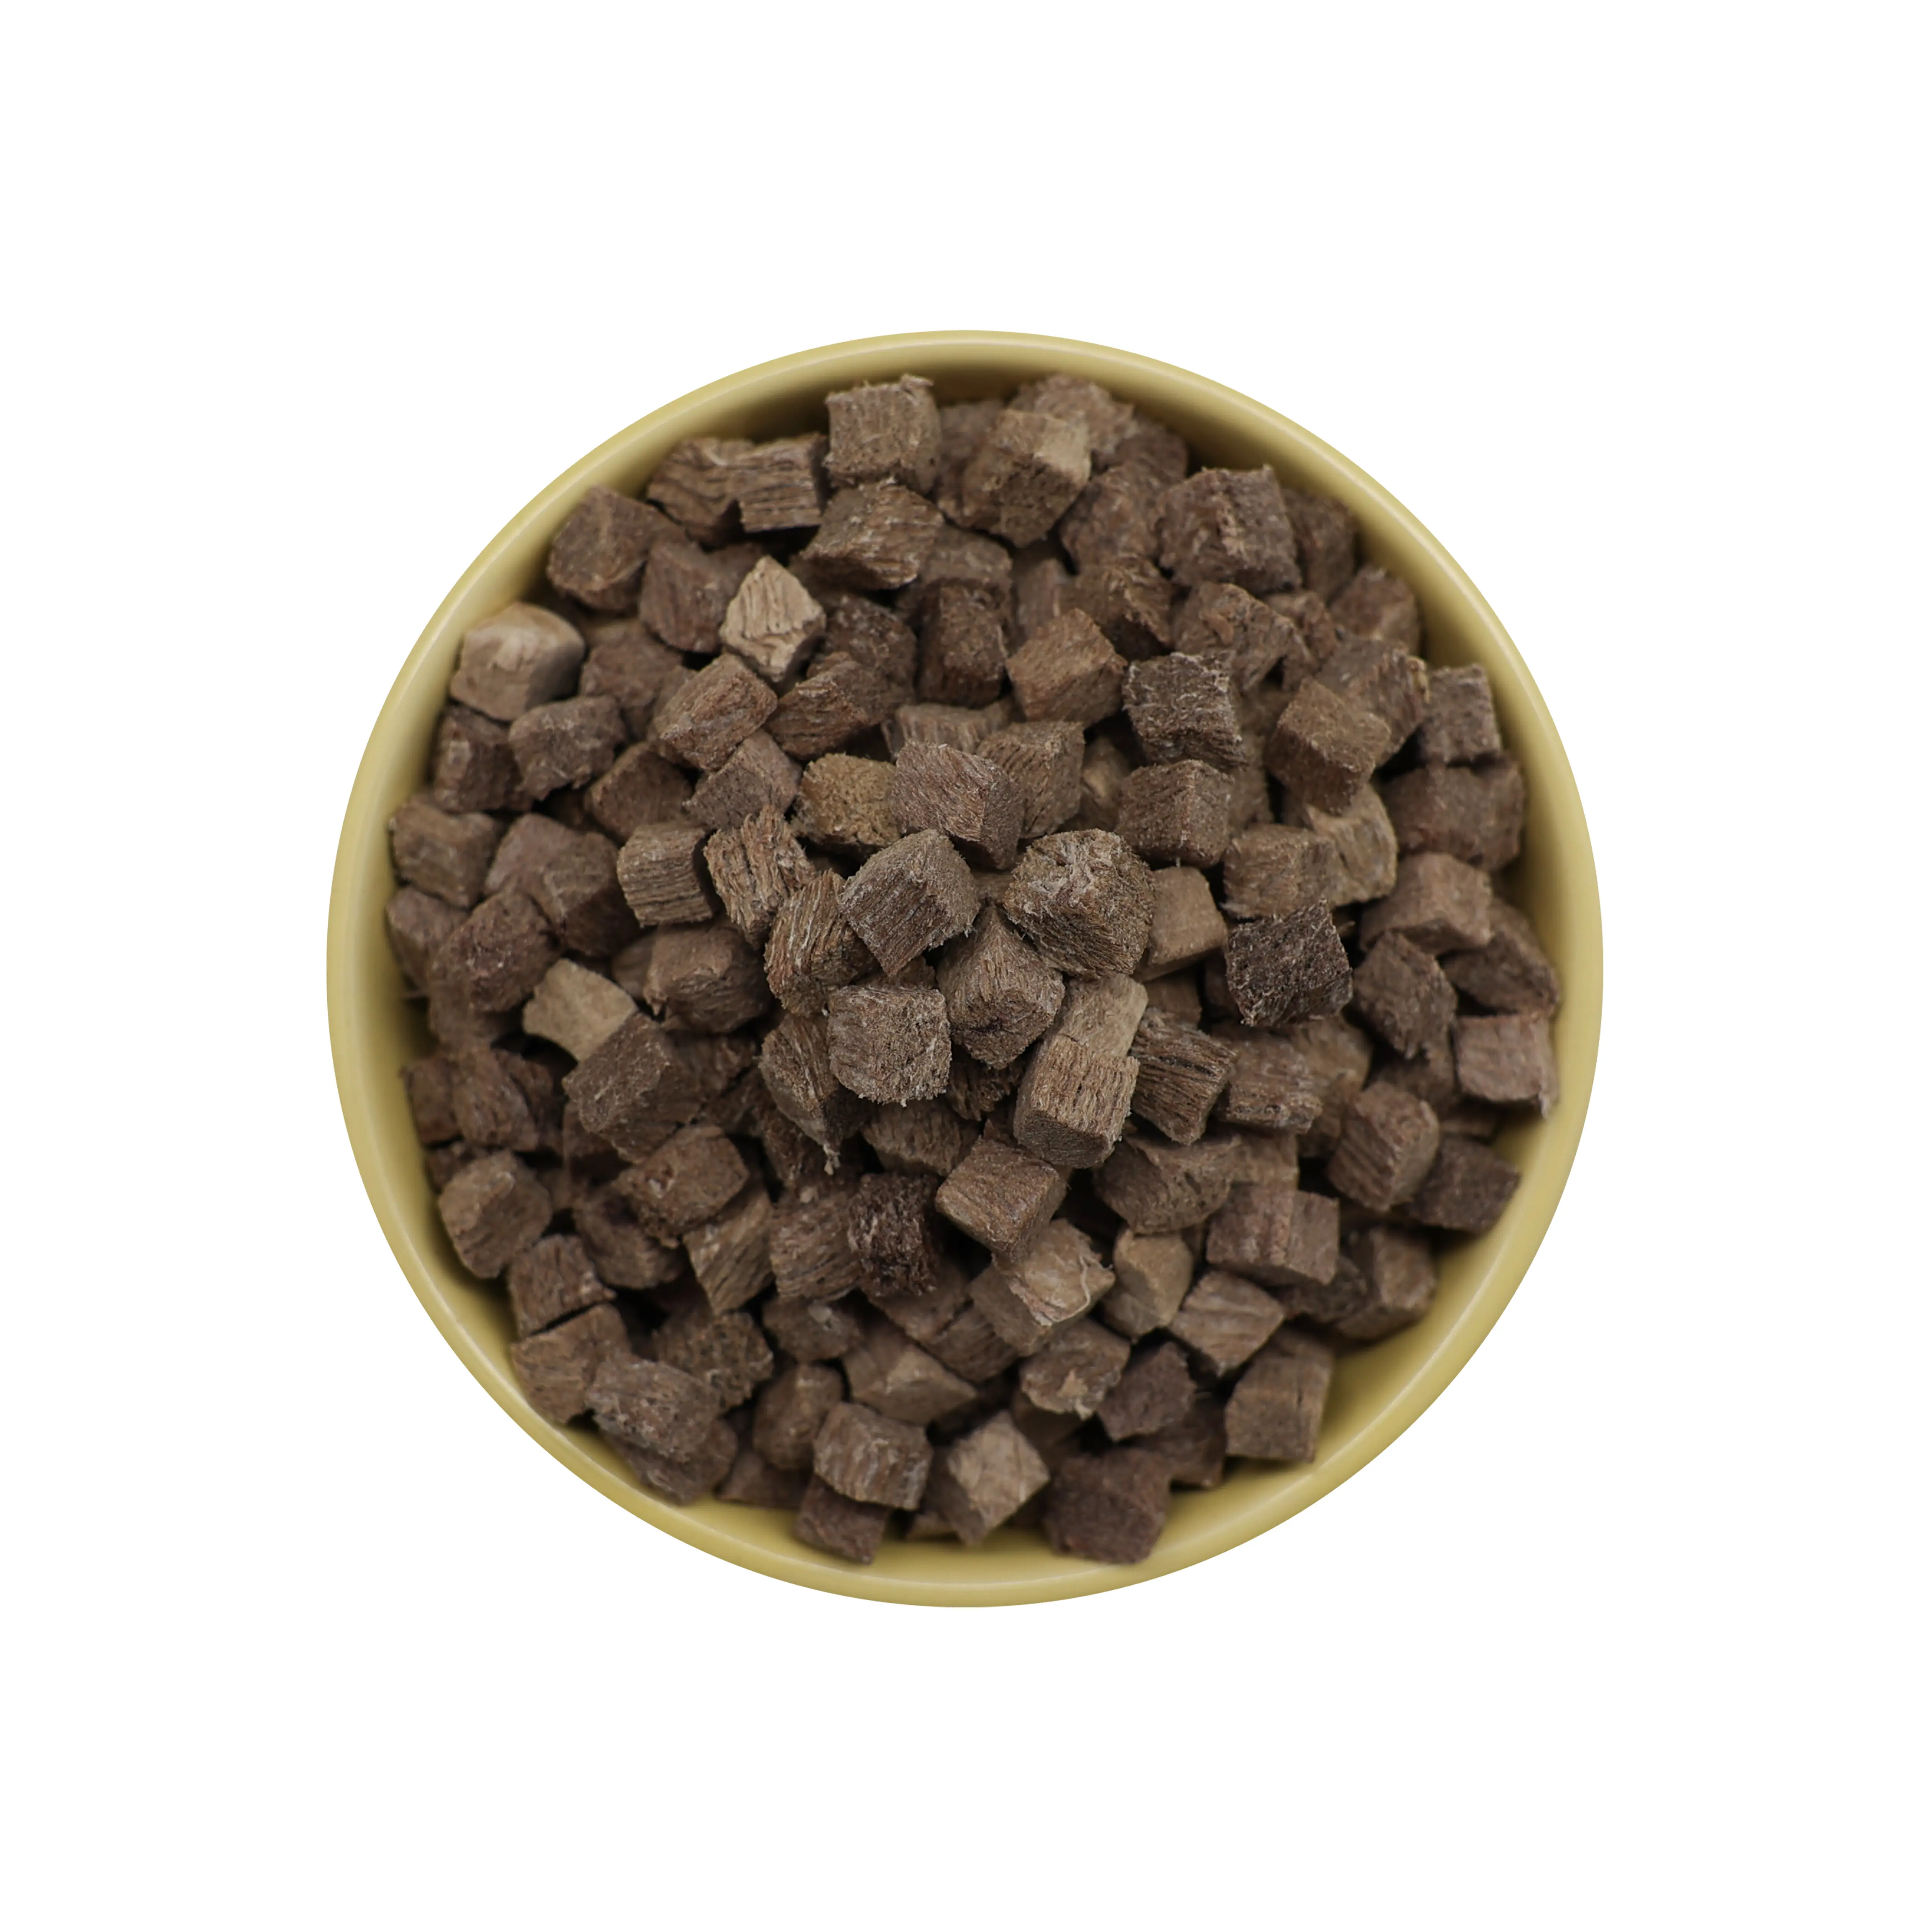 Ranova freeze dried venison dried cat food Vension Safety Dog Treats for cat and dog feeds